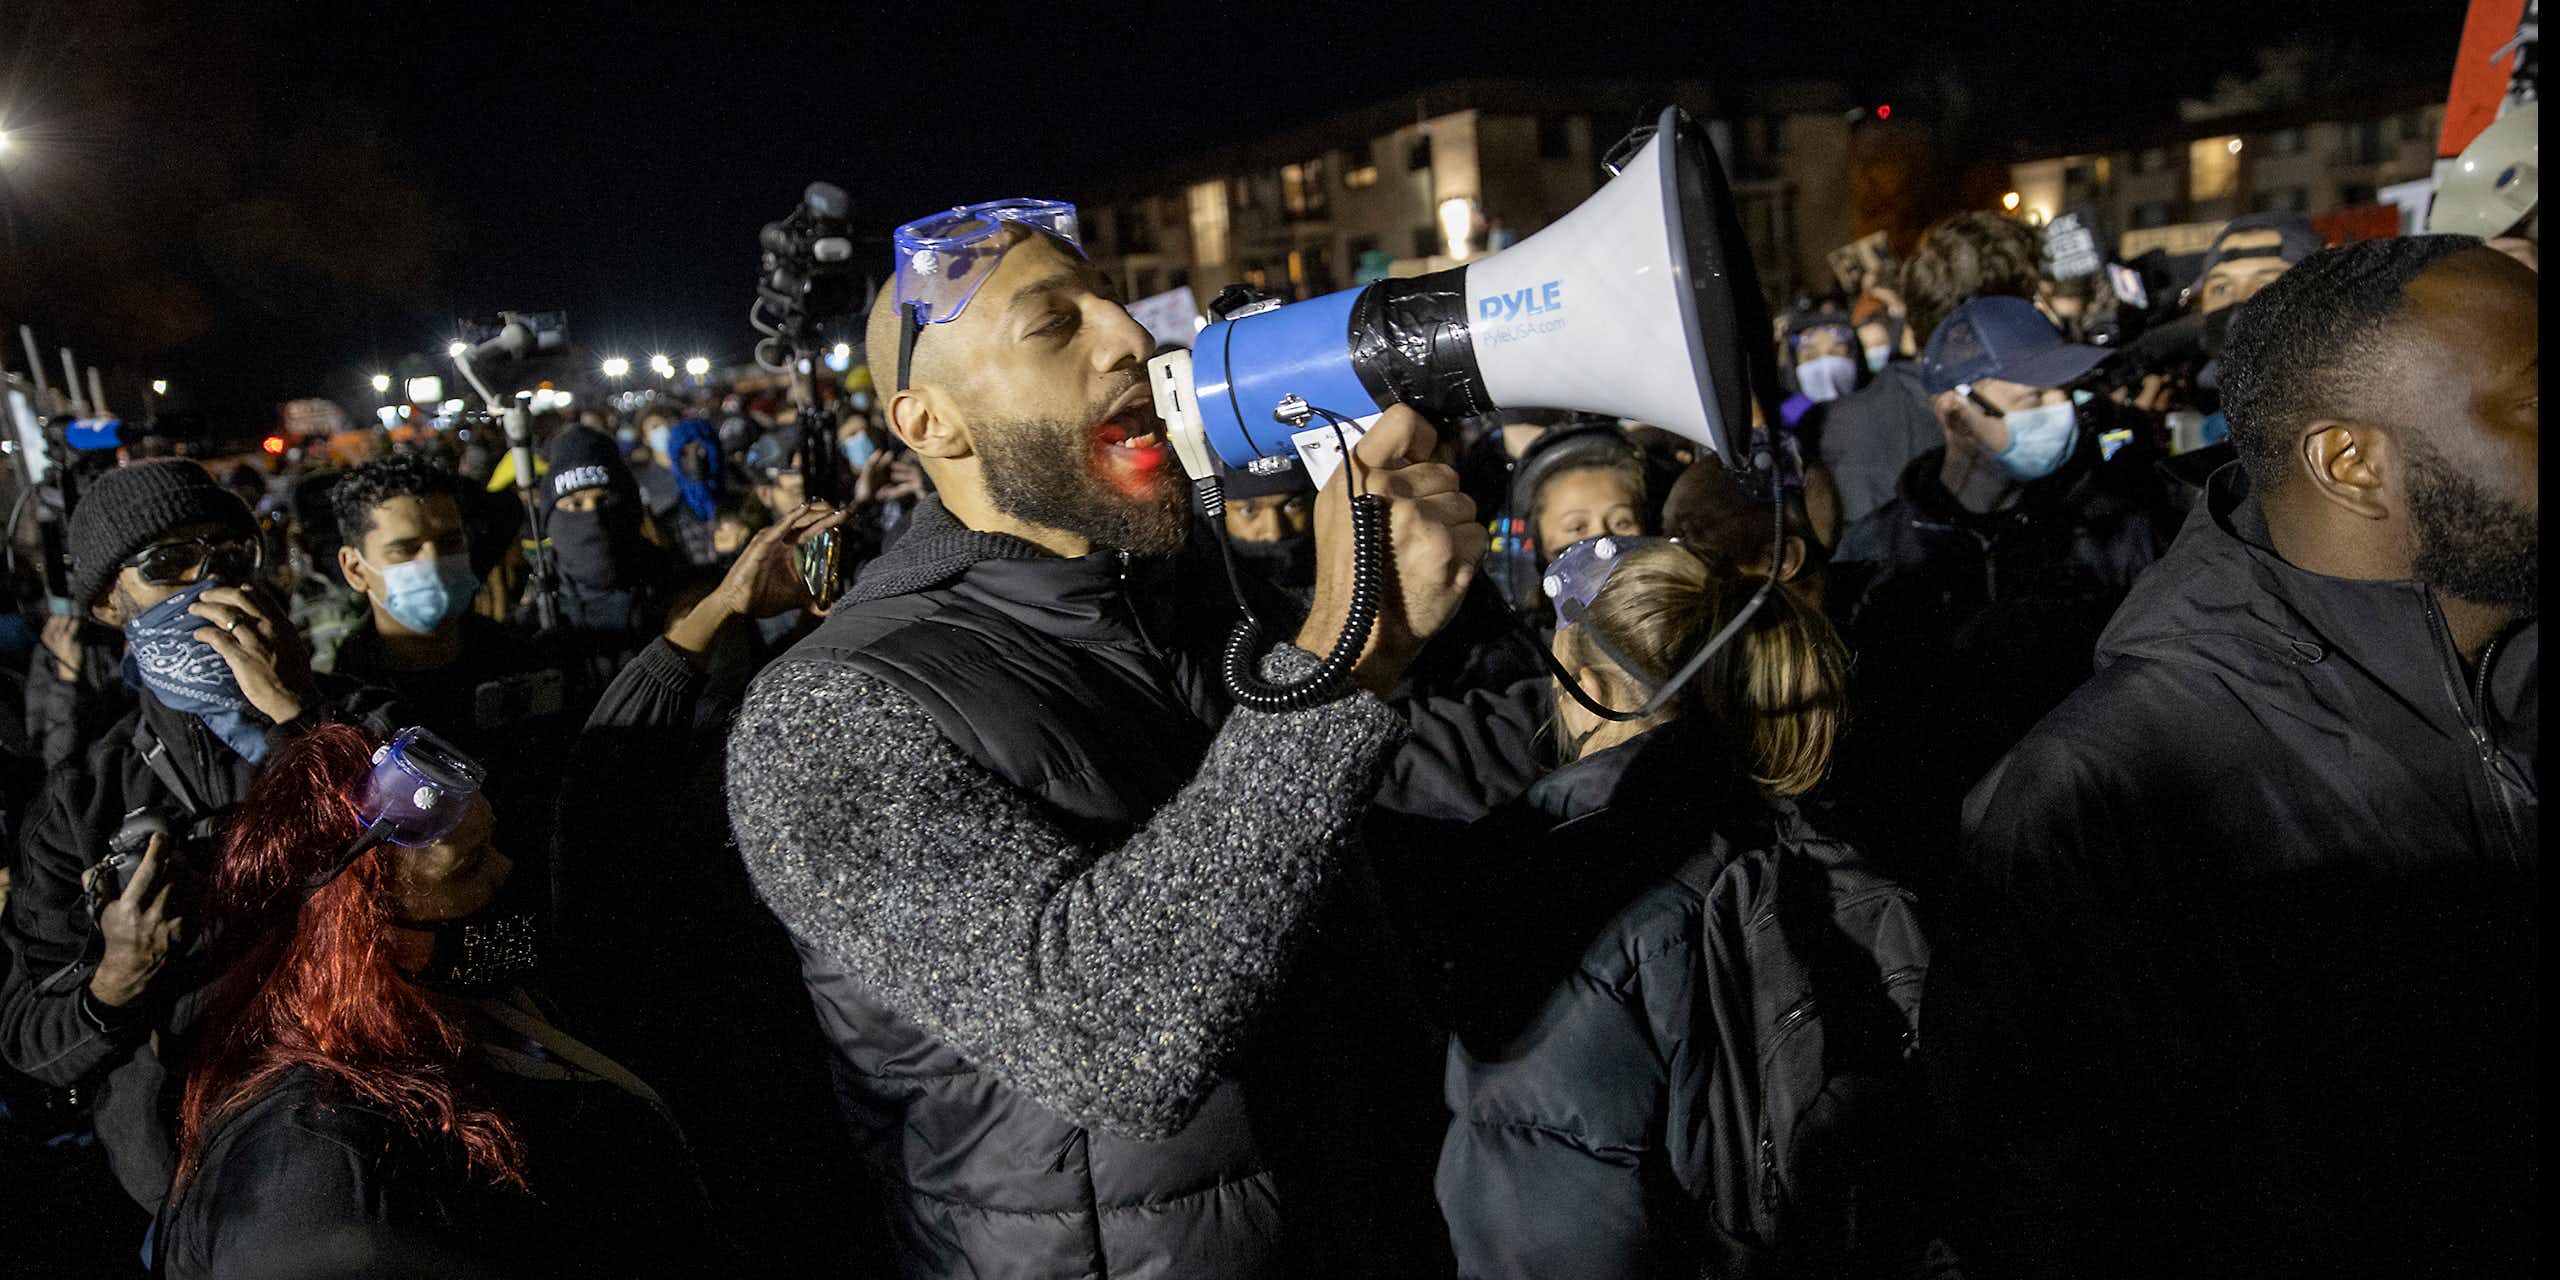 Bald black man yells into megaphone surrounded by a crowd.